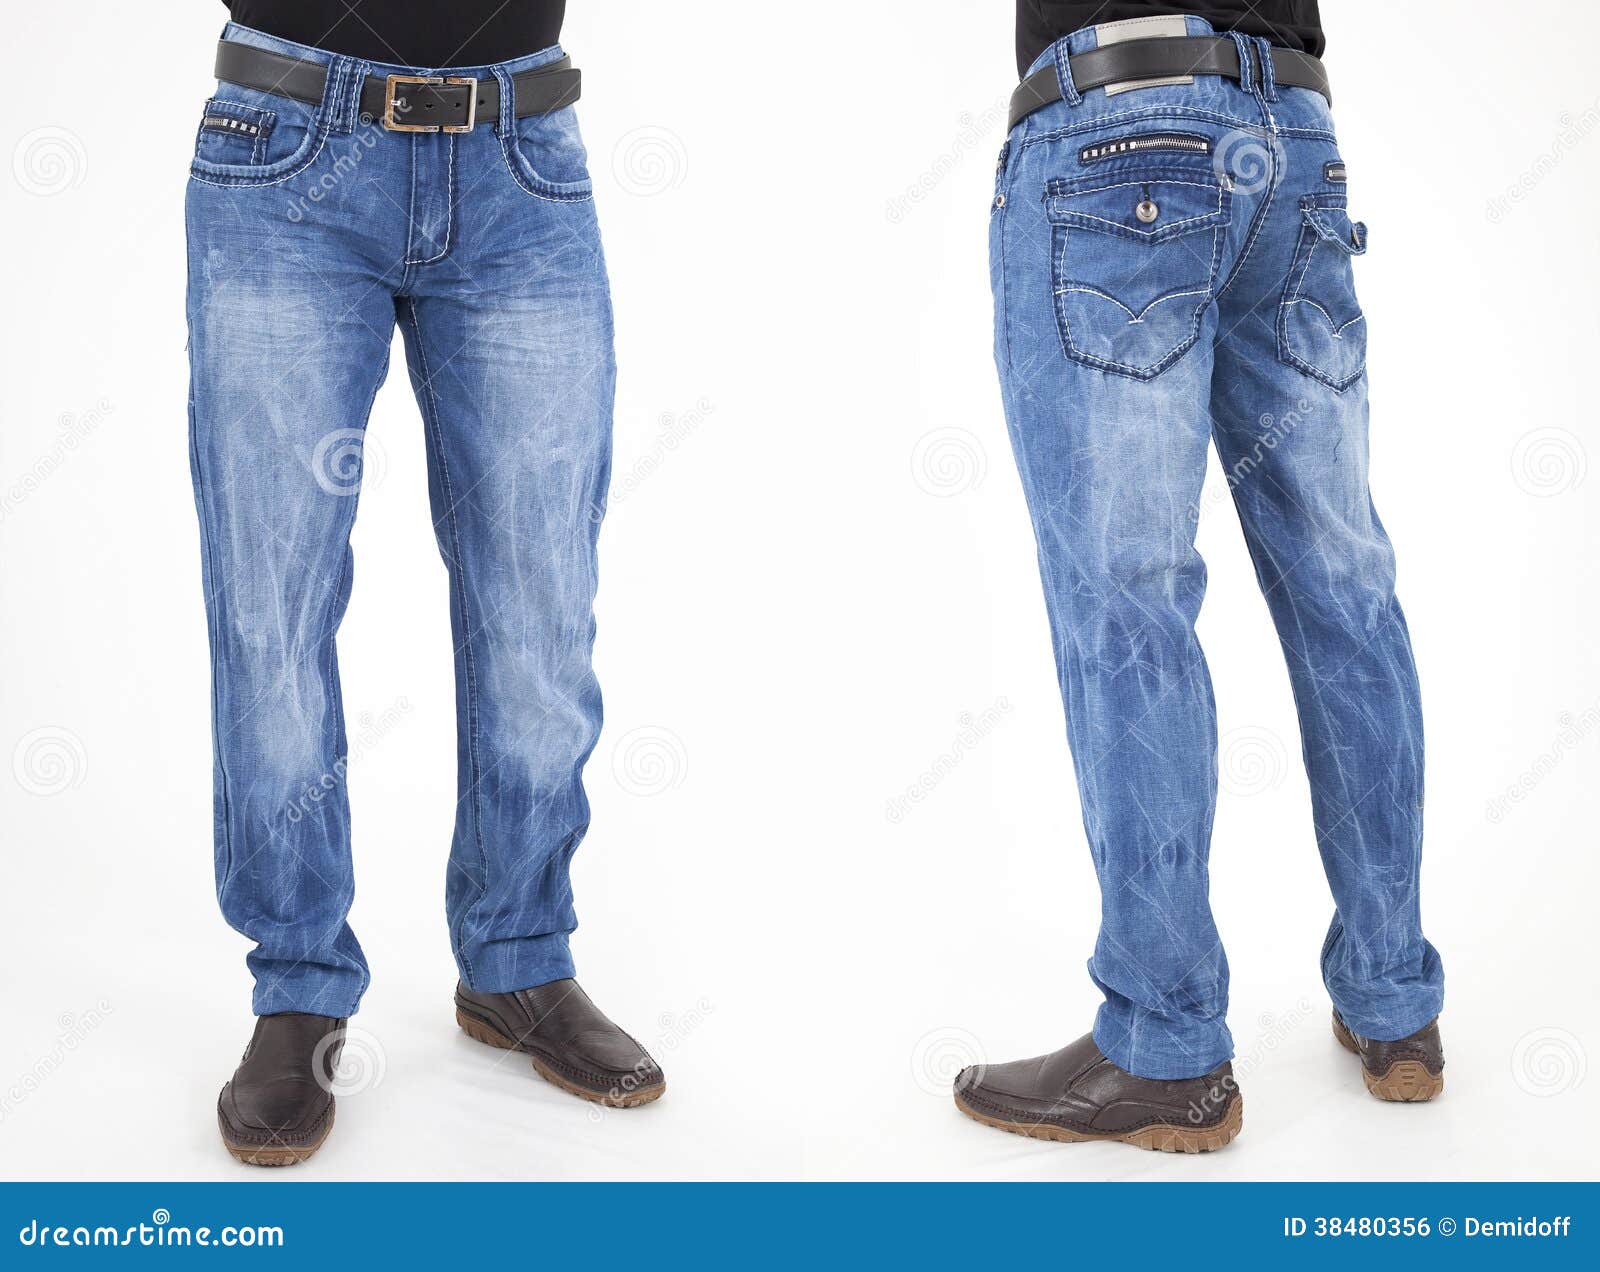 Men in jeans trousers stock photo. Image of beautiful - 38480356